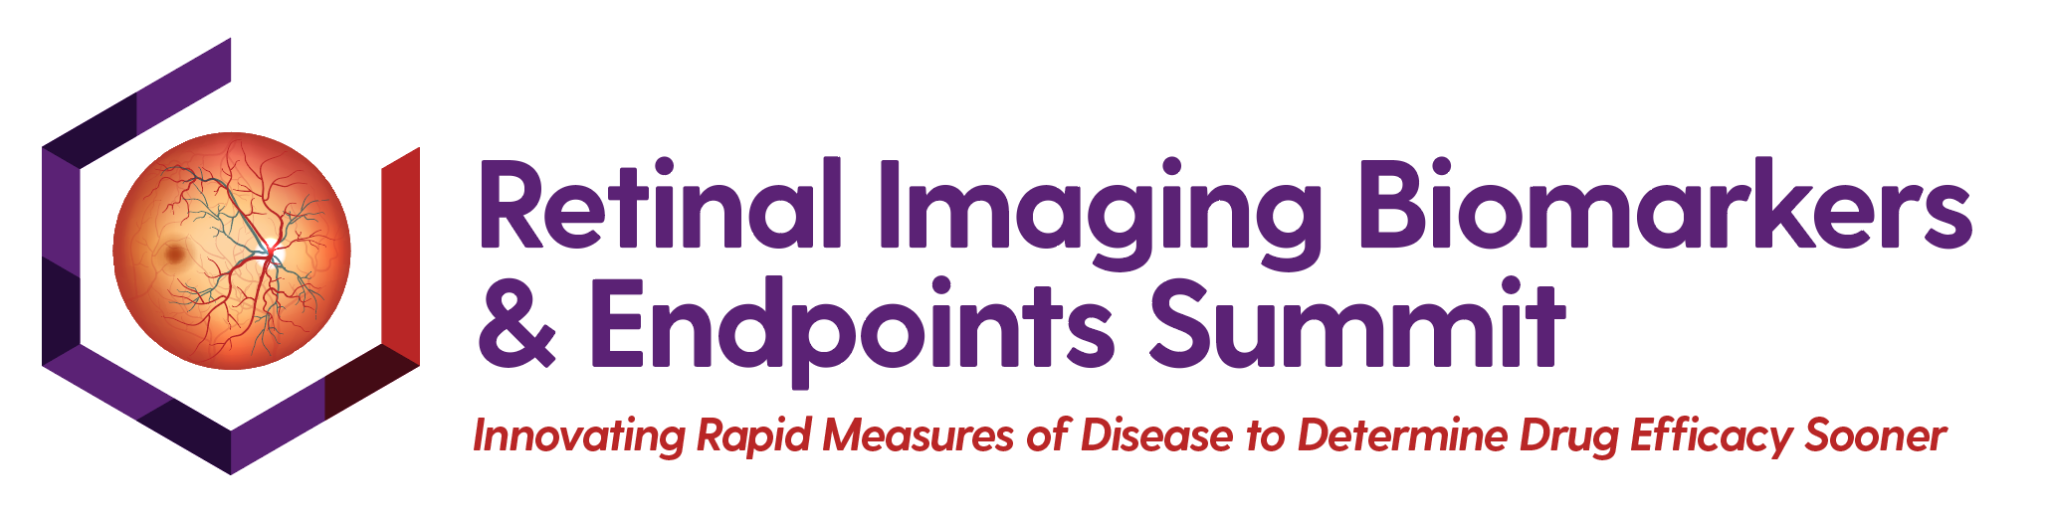 5756_Retinal-Imaging-Biomarkers-Endpoints-logo-2048x517 (1)